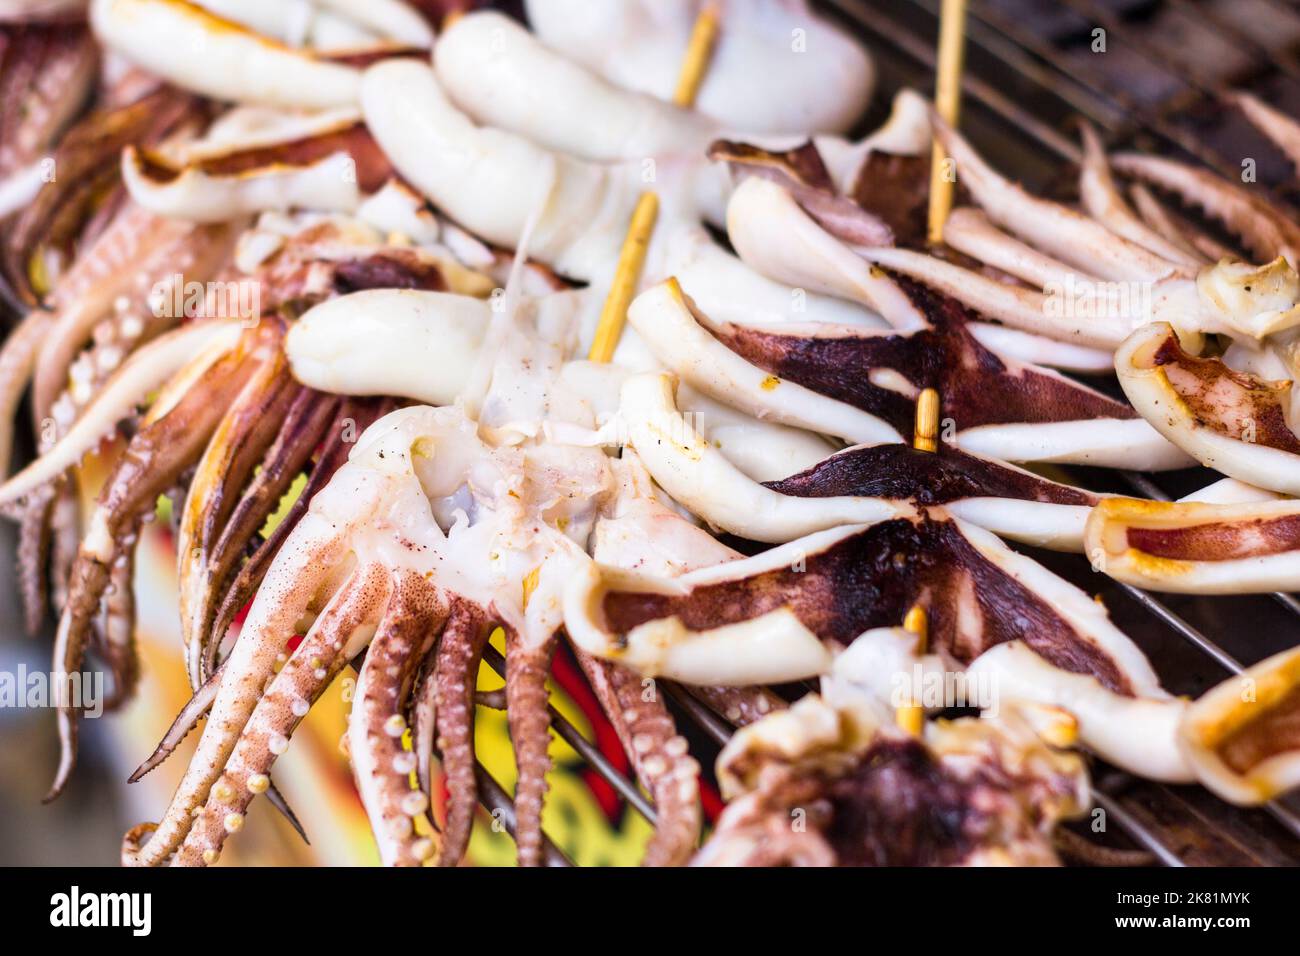 Squid skewers ready for grilling at a street food area in Taipei, Taiwan Stock Photo